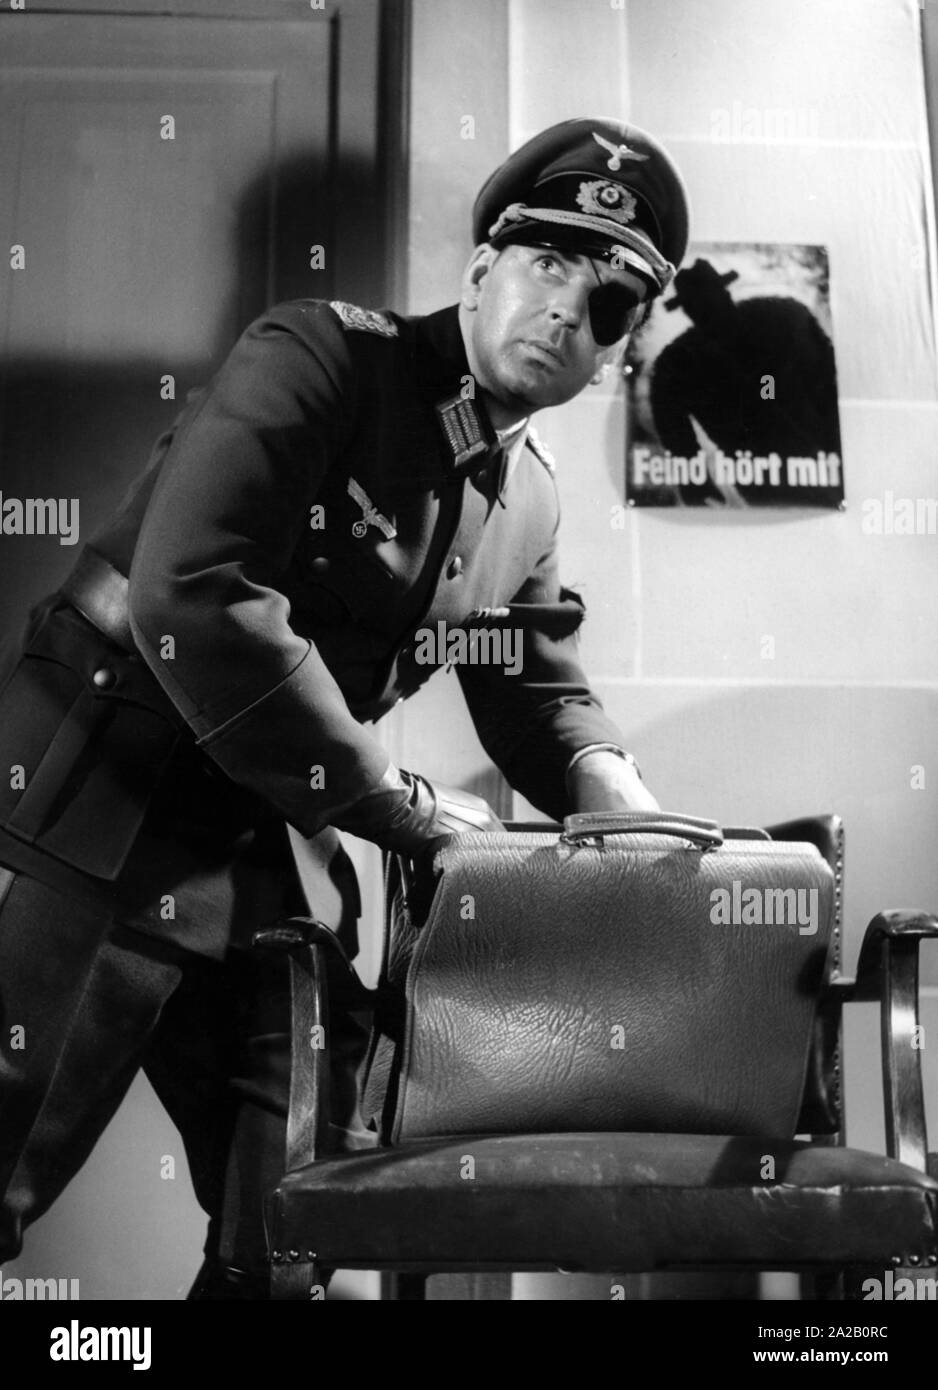 Scene from the film 'It Happened on July 20th' by Georg Wilhelm Pabst, the film was premiered on 19 June 1955. Claus Schenk Graf von Stauffenberg was impersonated by Bernhard Wicki. Stock Photo